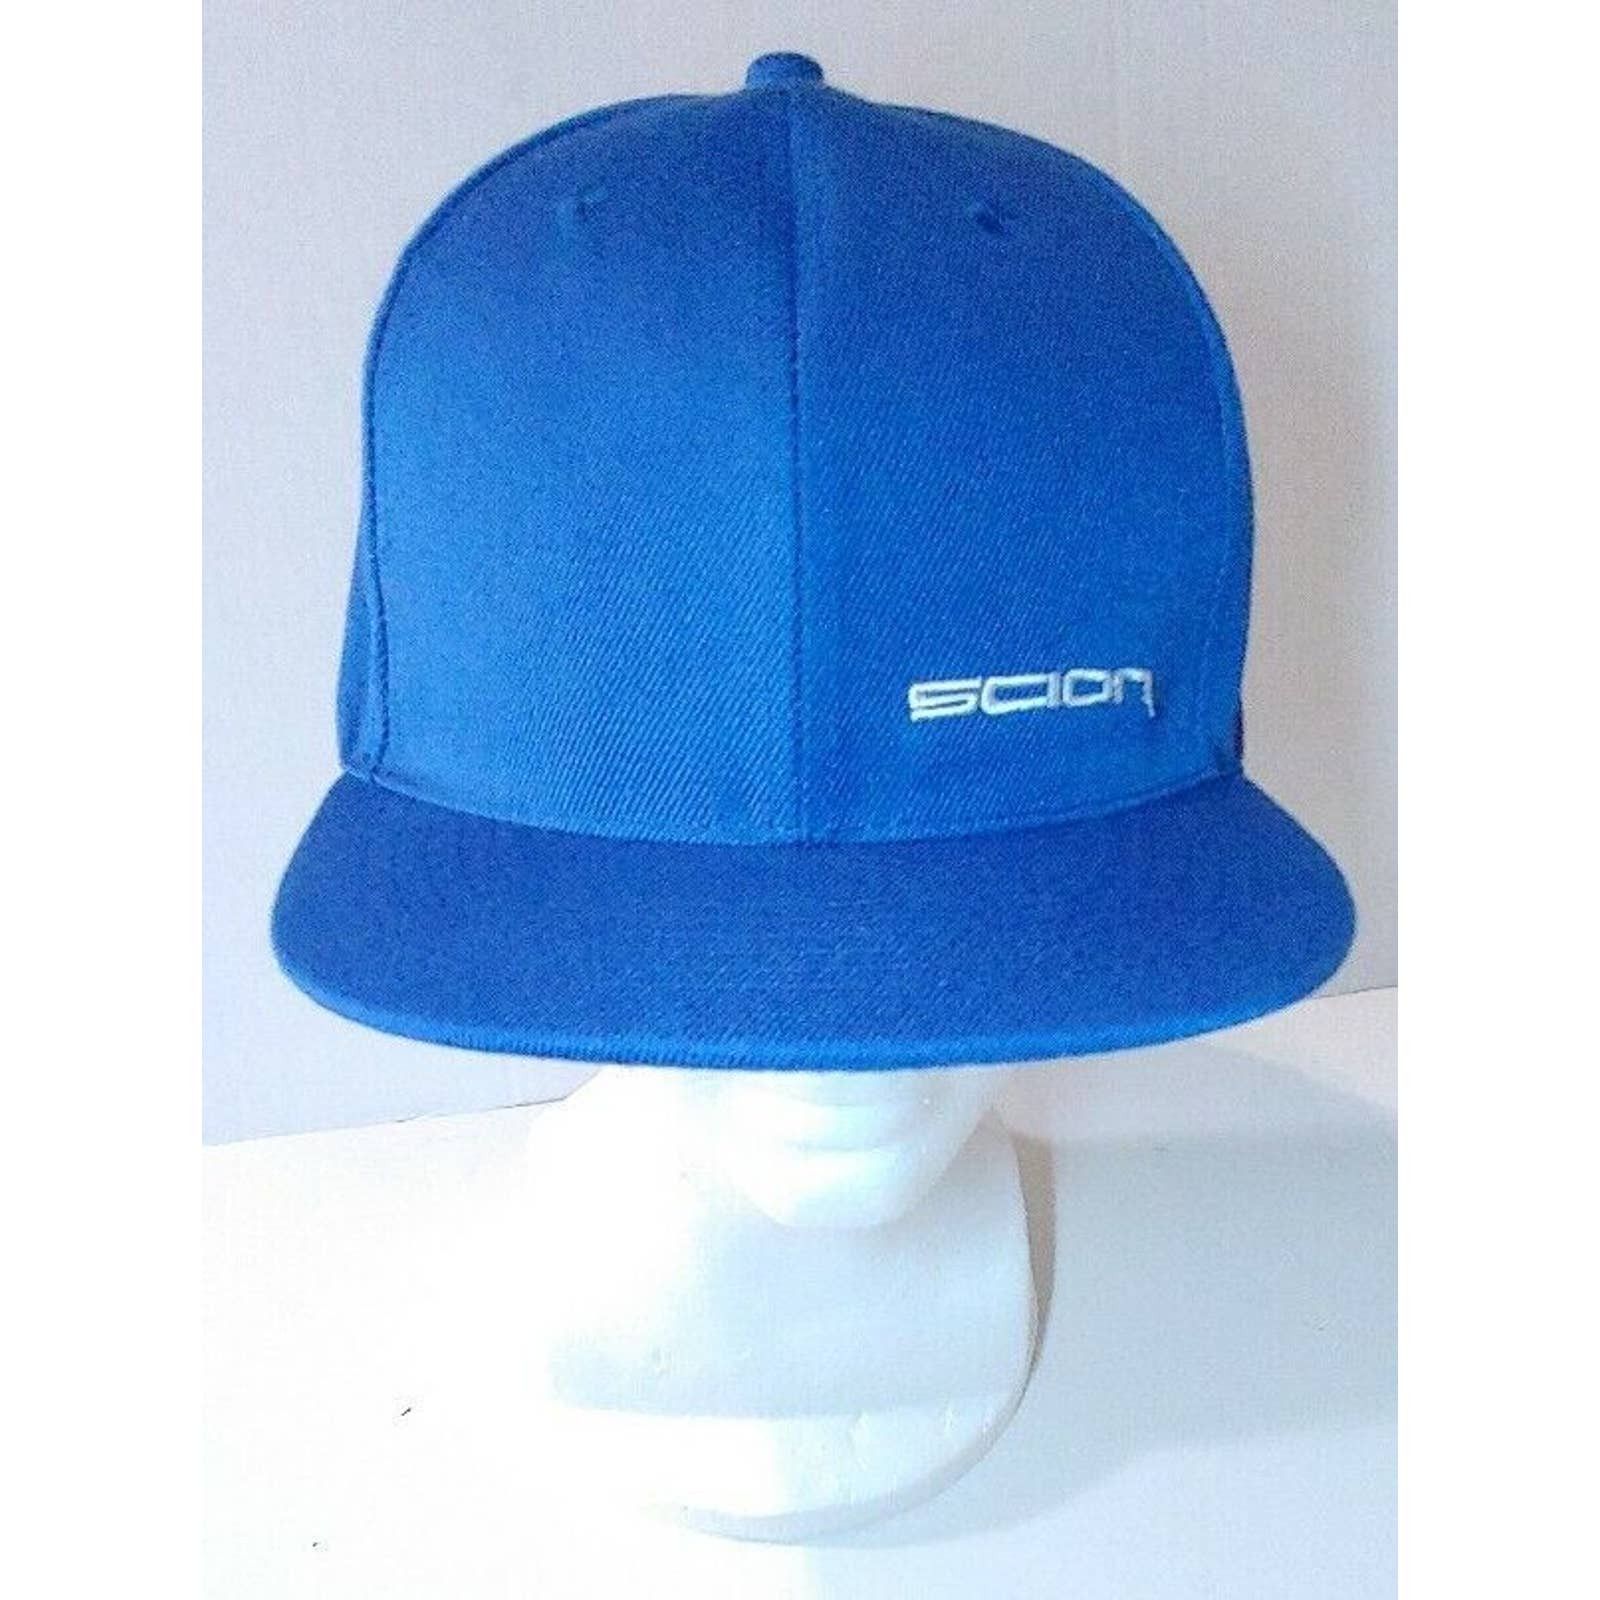 Other SCION TOYOTA Baseball Cap Hat Adjustable Blue Snapback Size ONE SIZE - 2 Preview